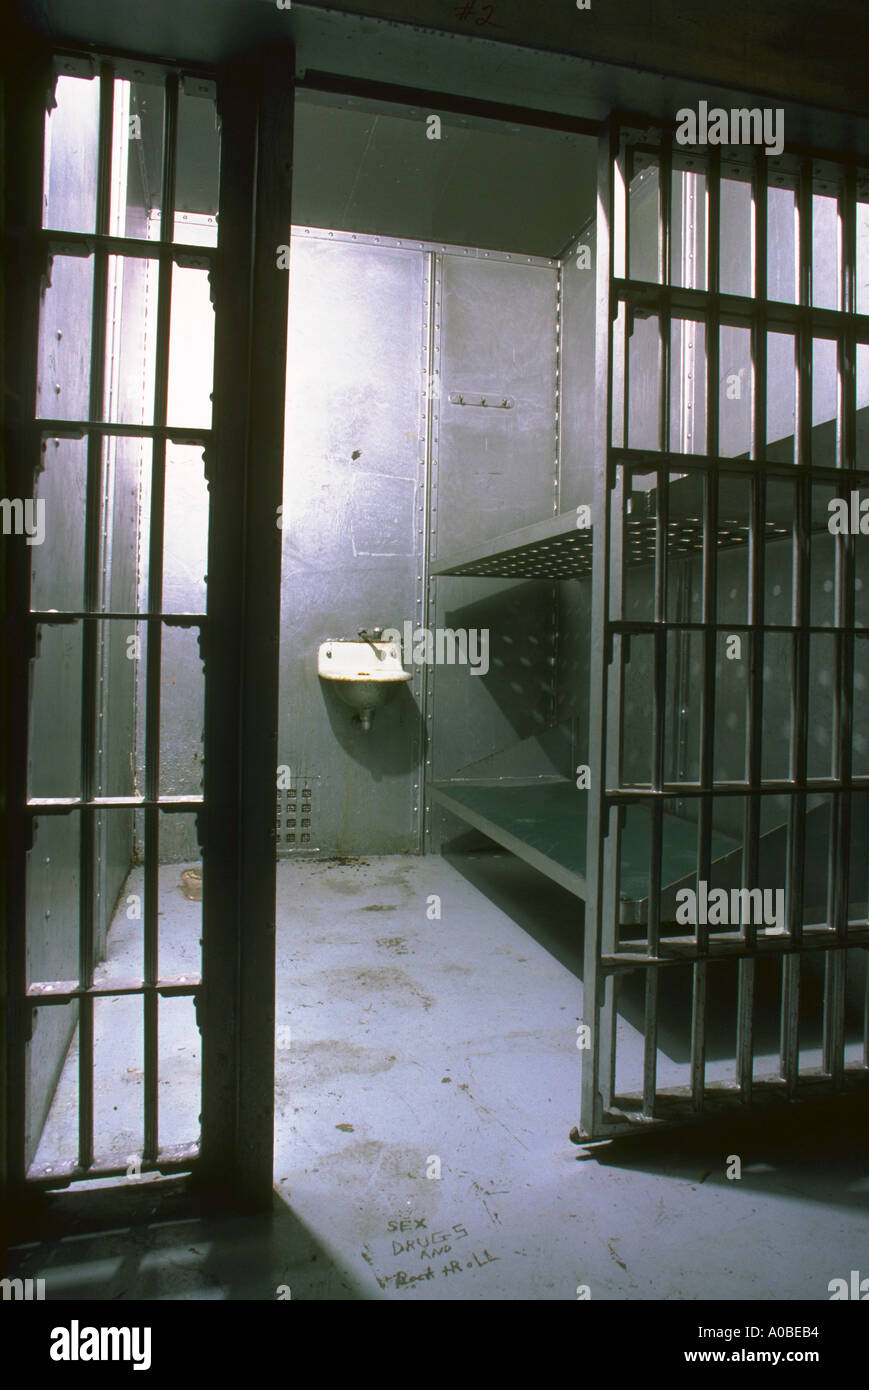 Typical prison cell Stock Photo